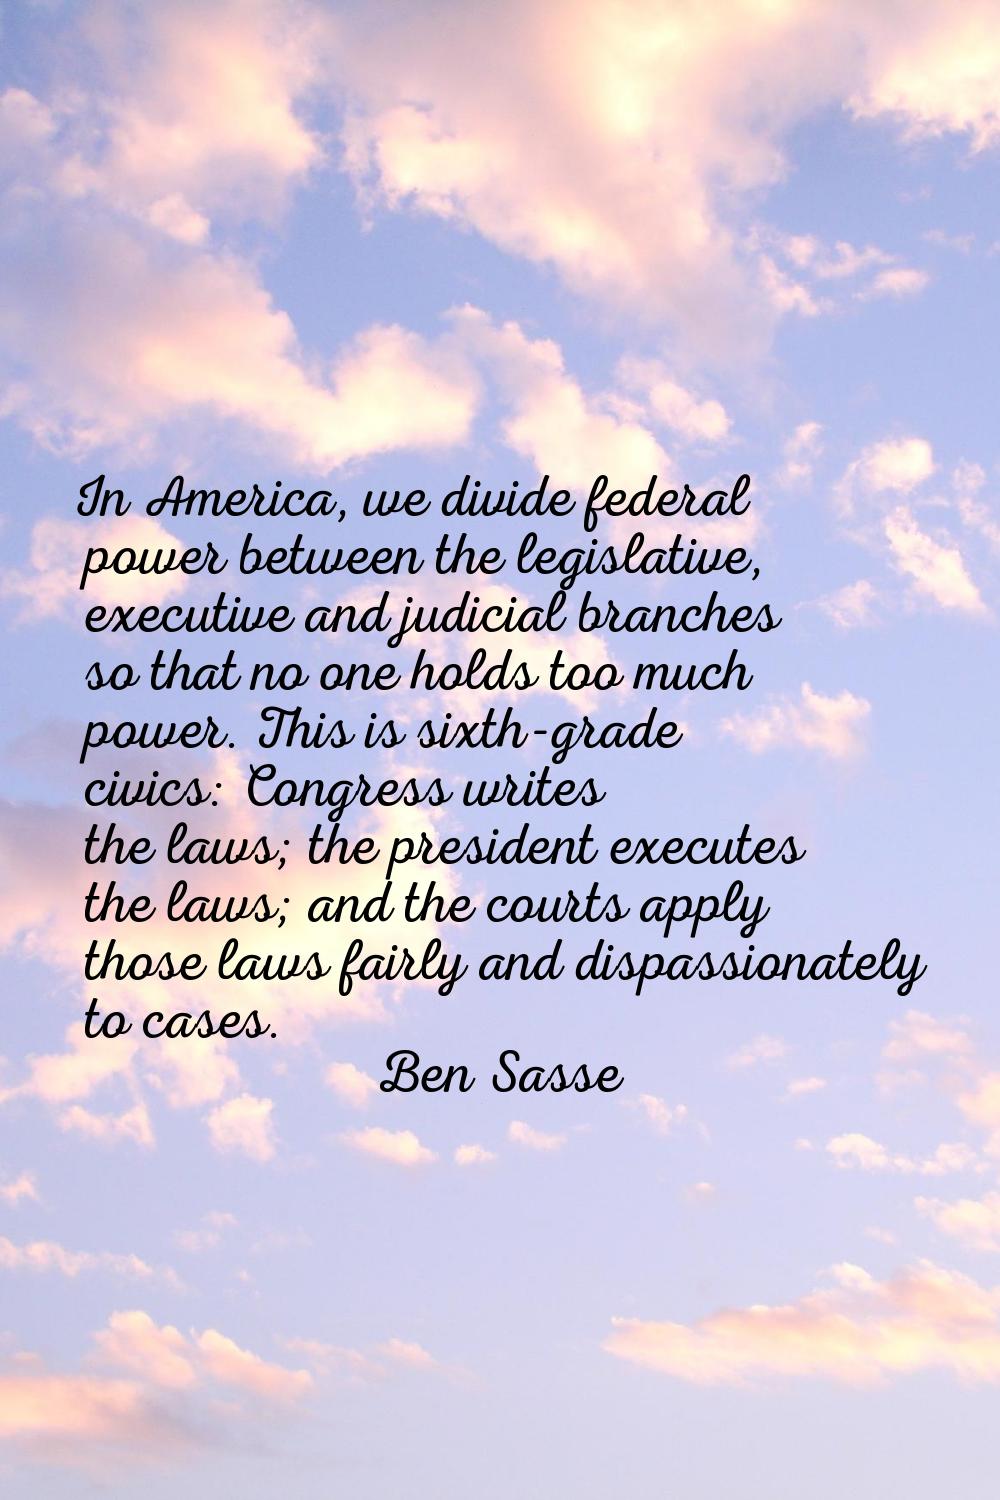 In America, we divide federal power between the legislative, executive and judicial branches so tha